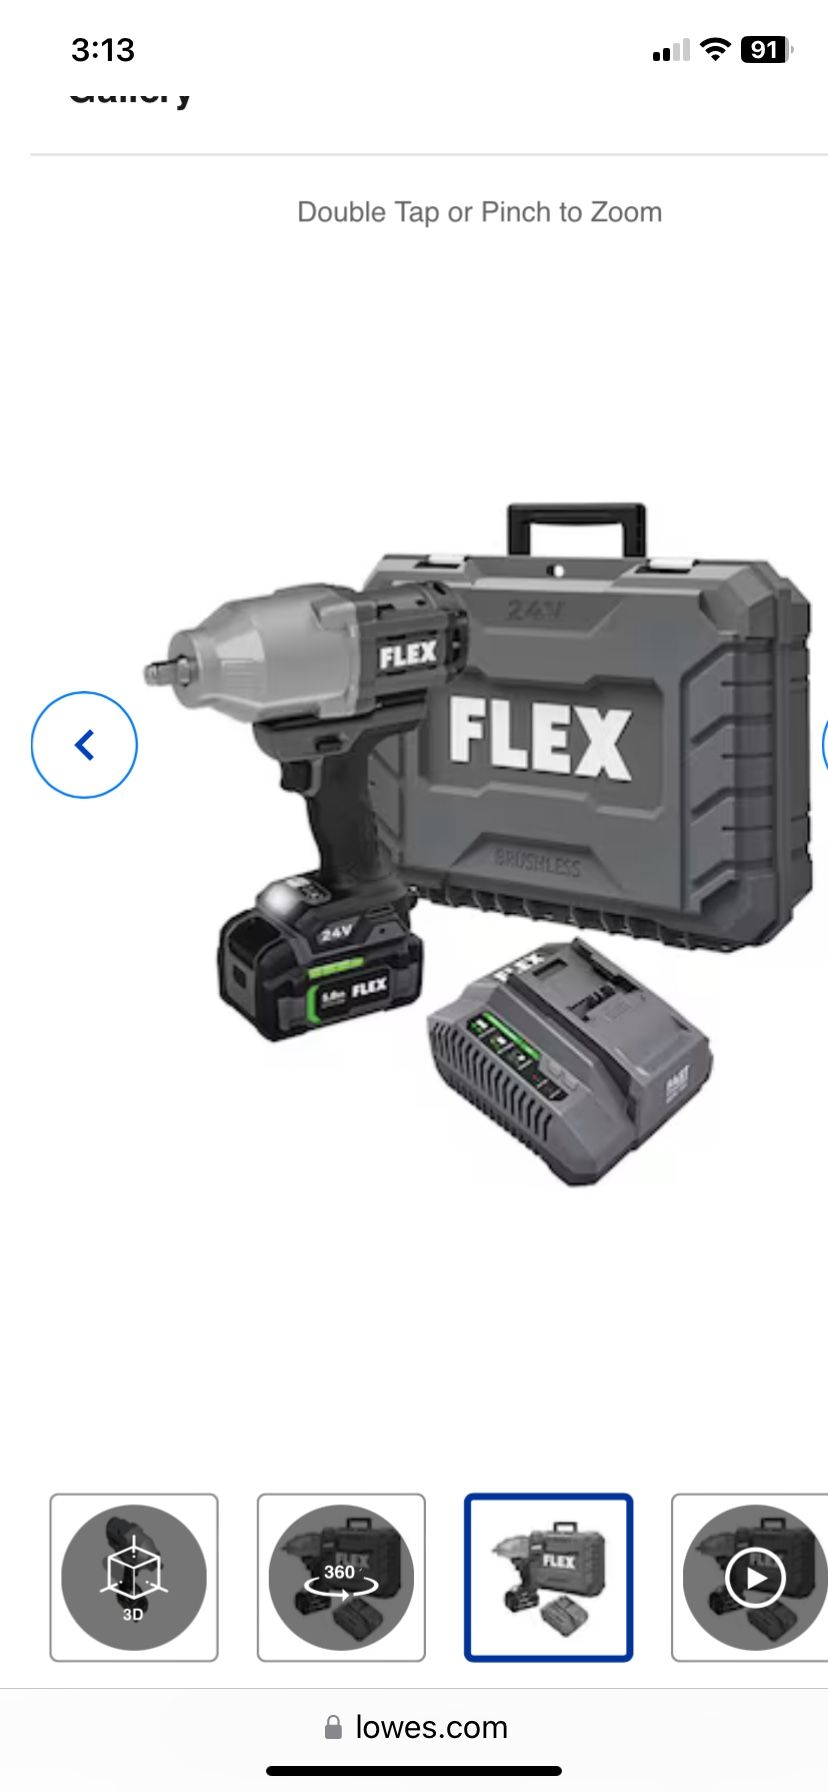 FLEX 24-volt Variable Speed Brushless 1/2-in Drive Cordless Impact Wrench (Battery Included)